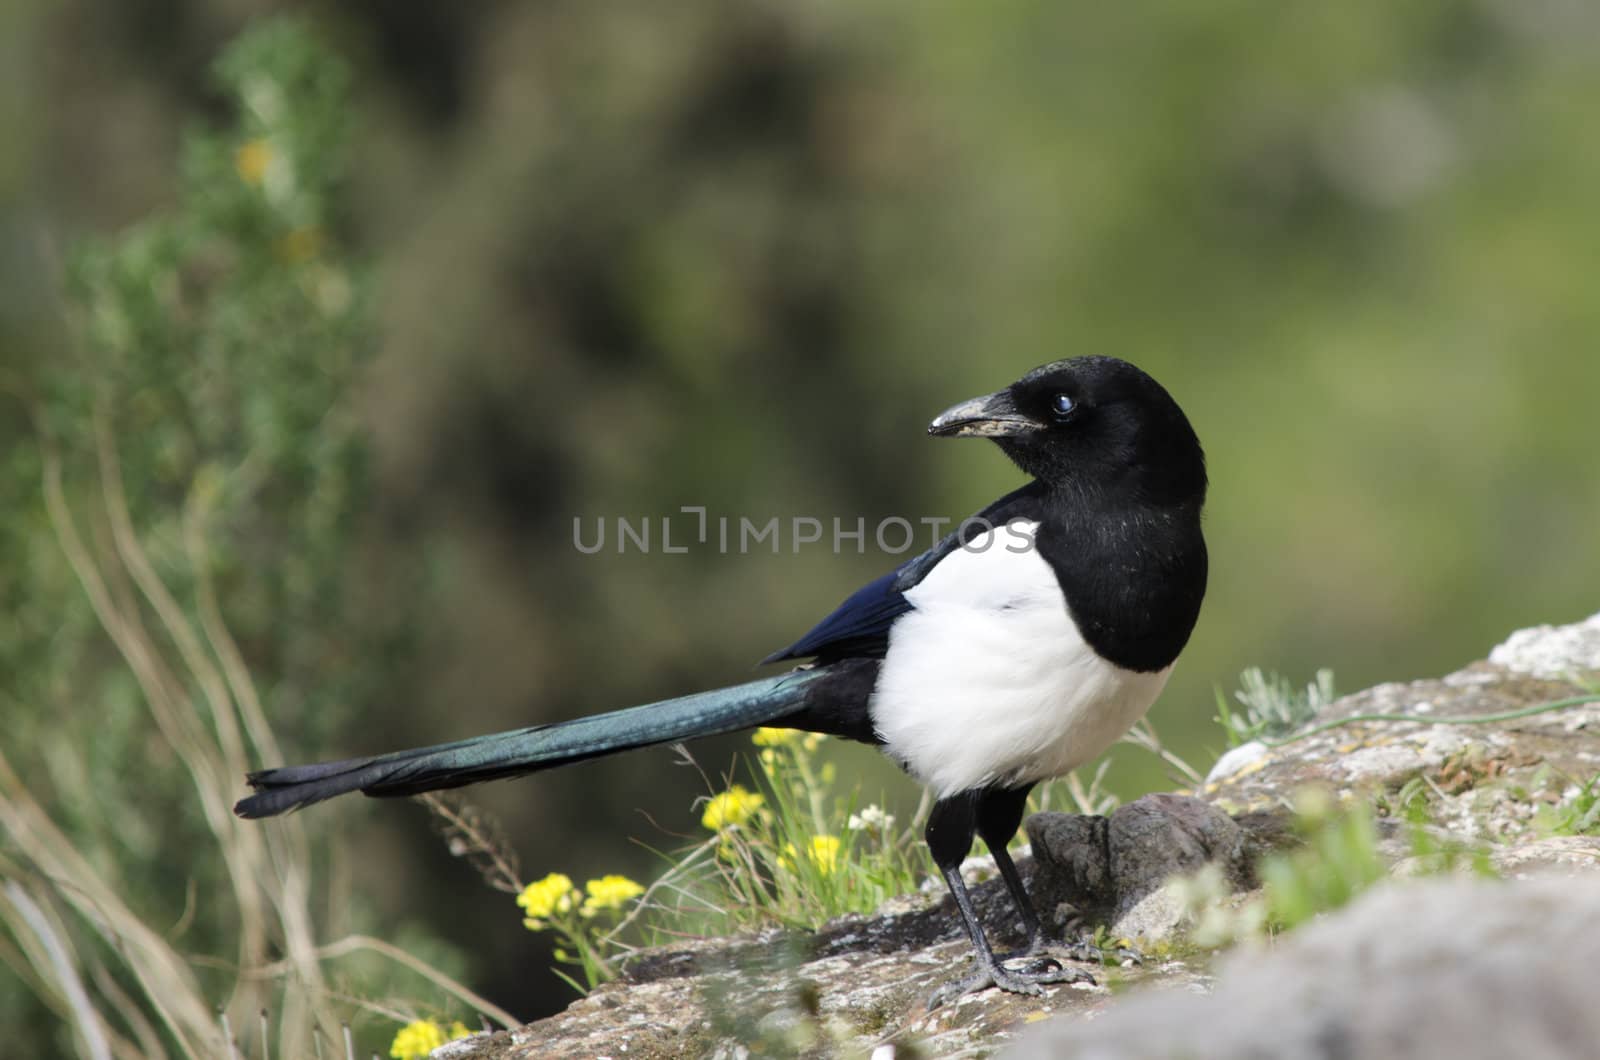 Authentic wildlife picture of a magpie in its natural environment.